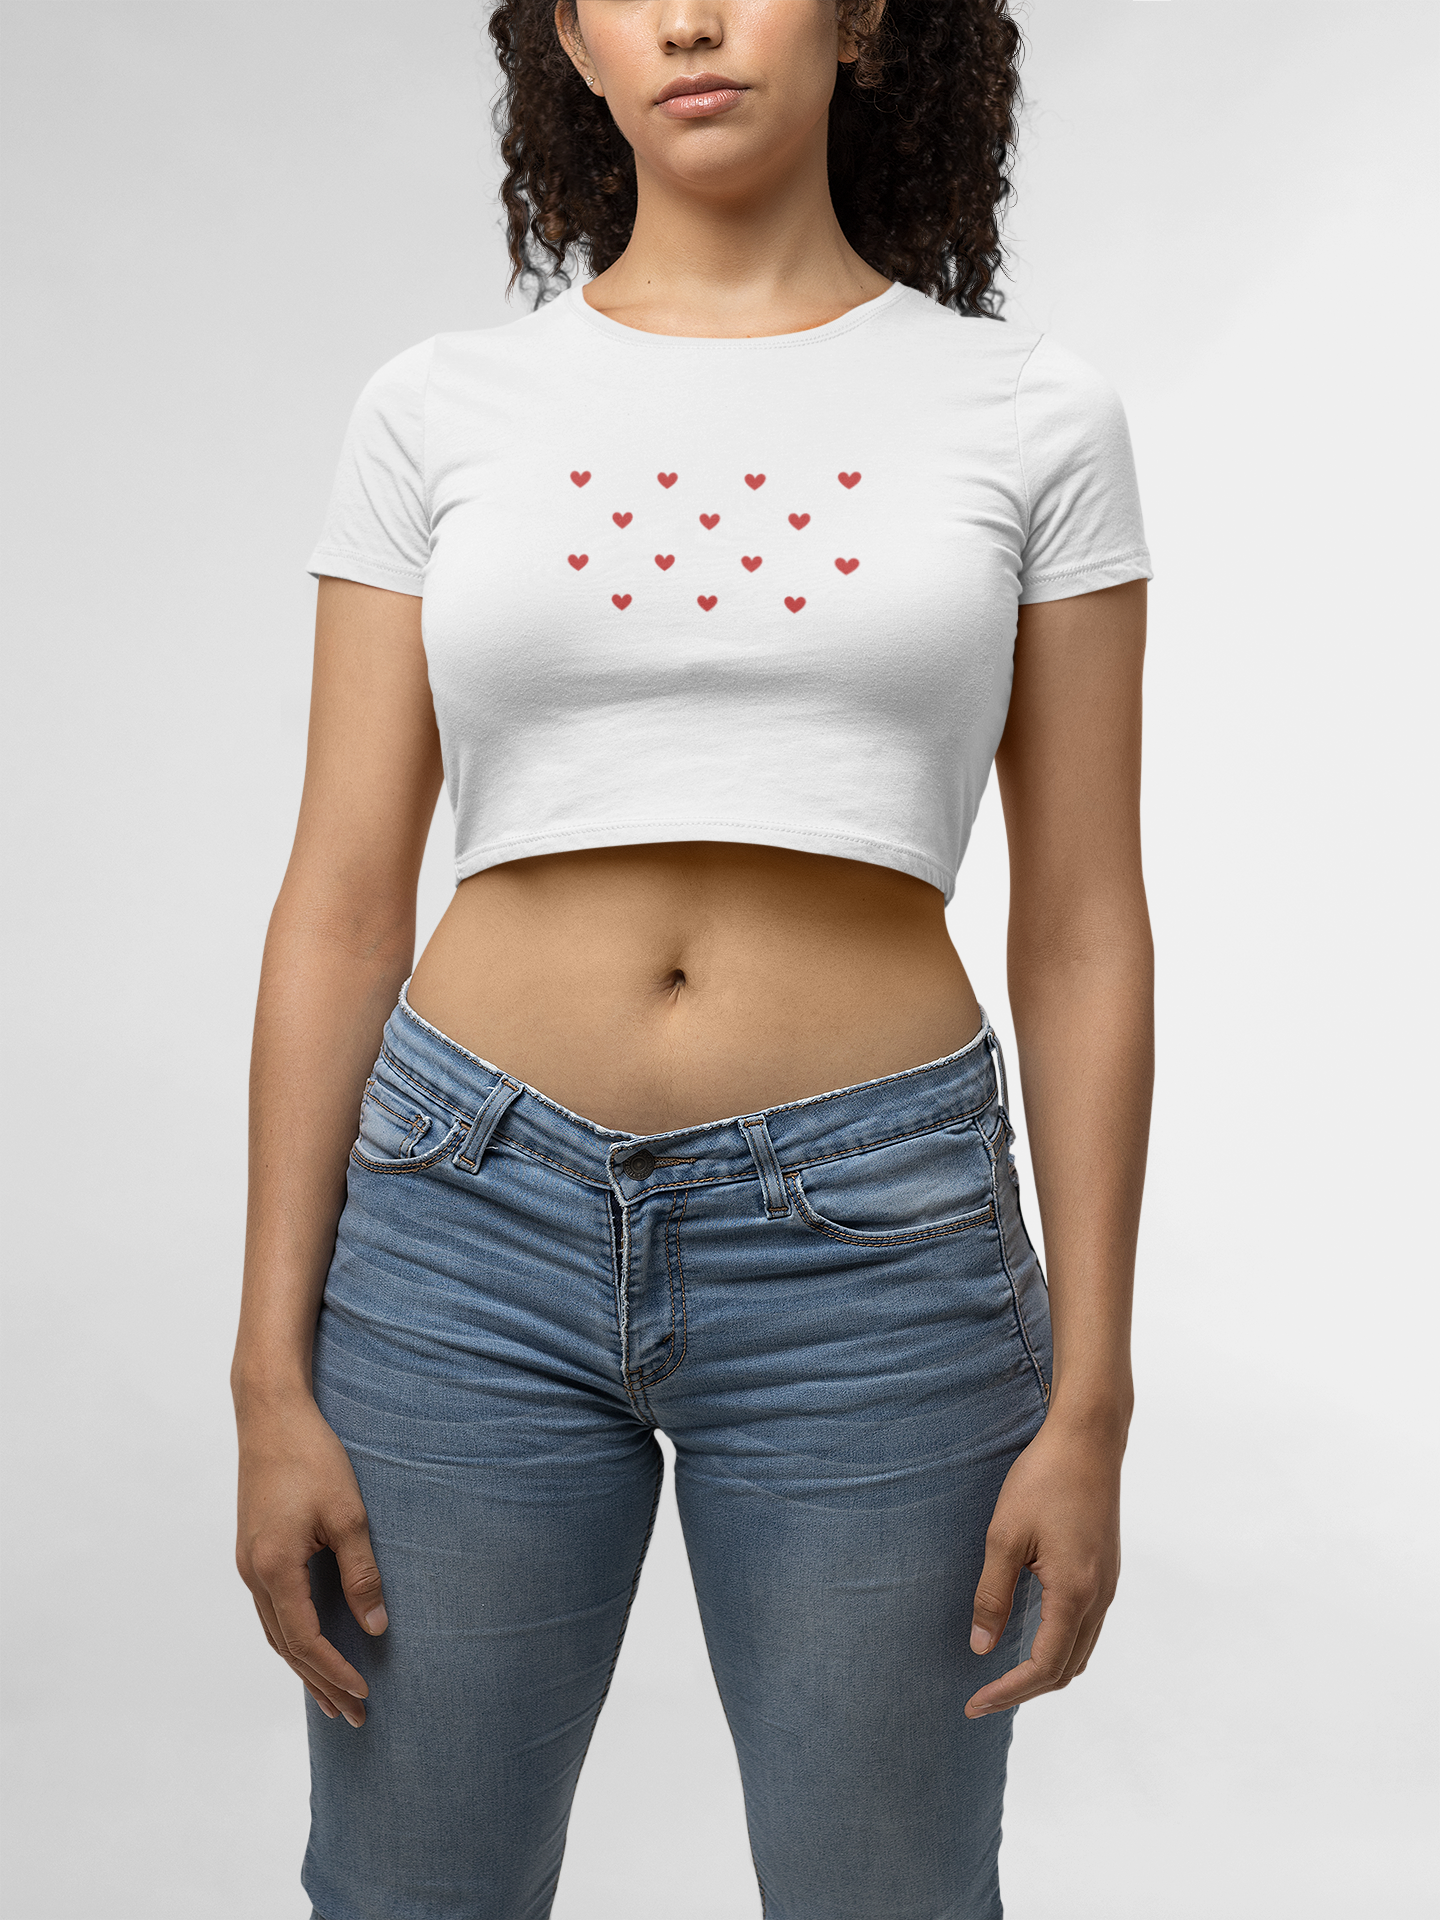 CROP TOP WHITE: SMALL HEARTS AT CENTER